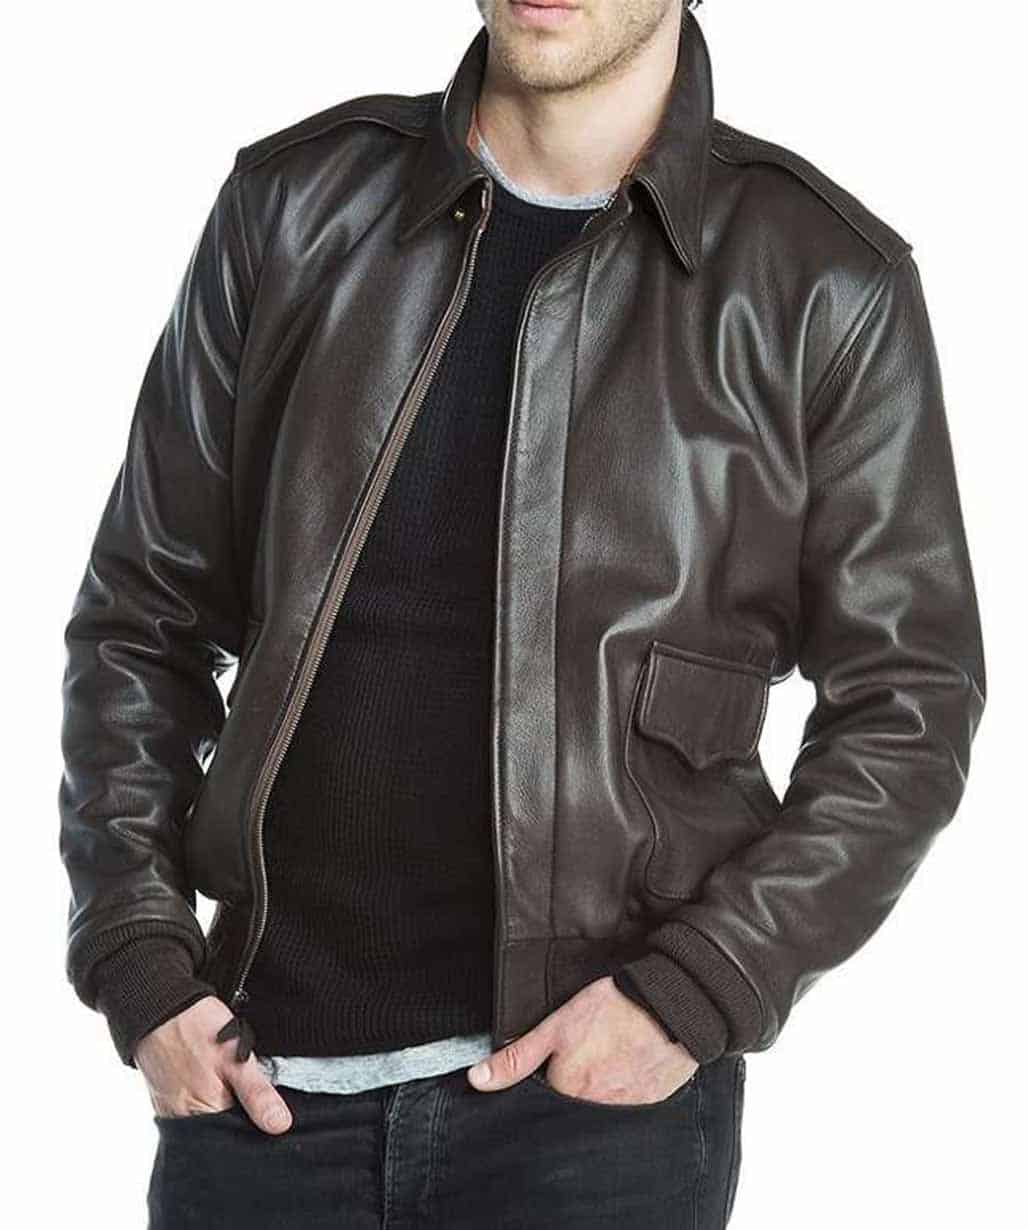 donald-trump-a2-brown-bomber-leather-jacket-outfit